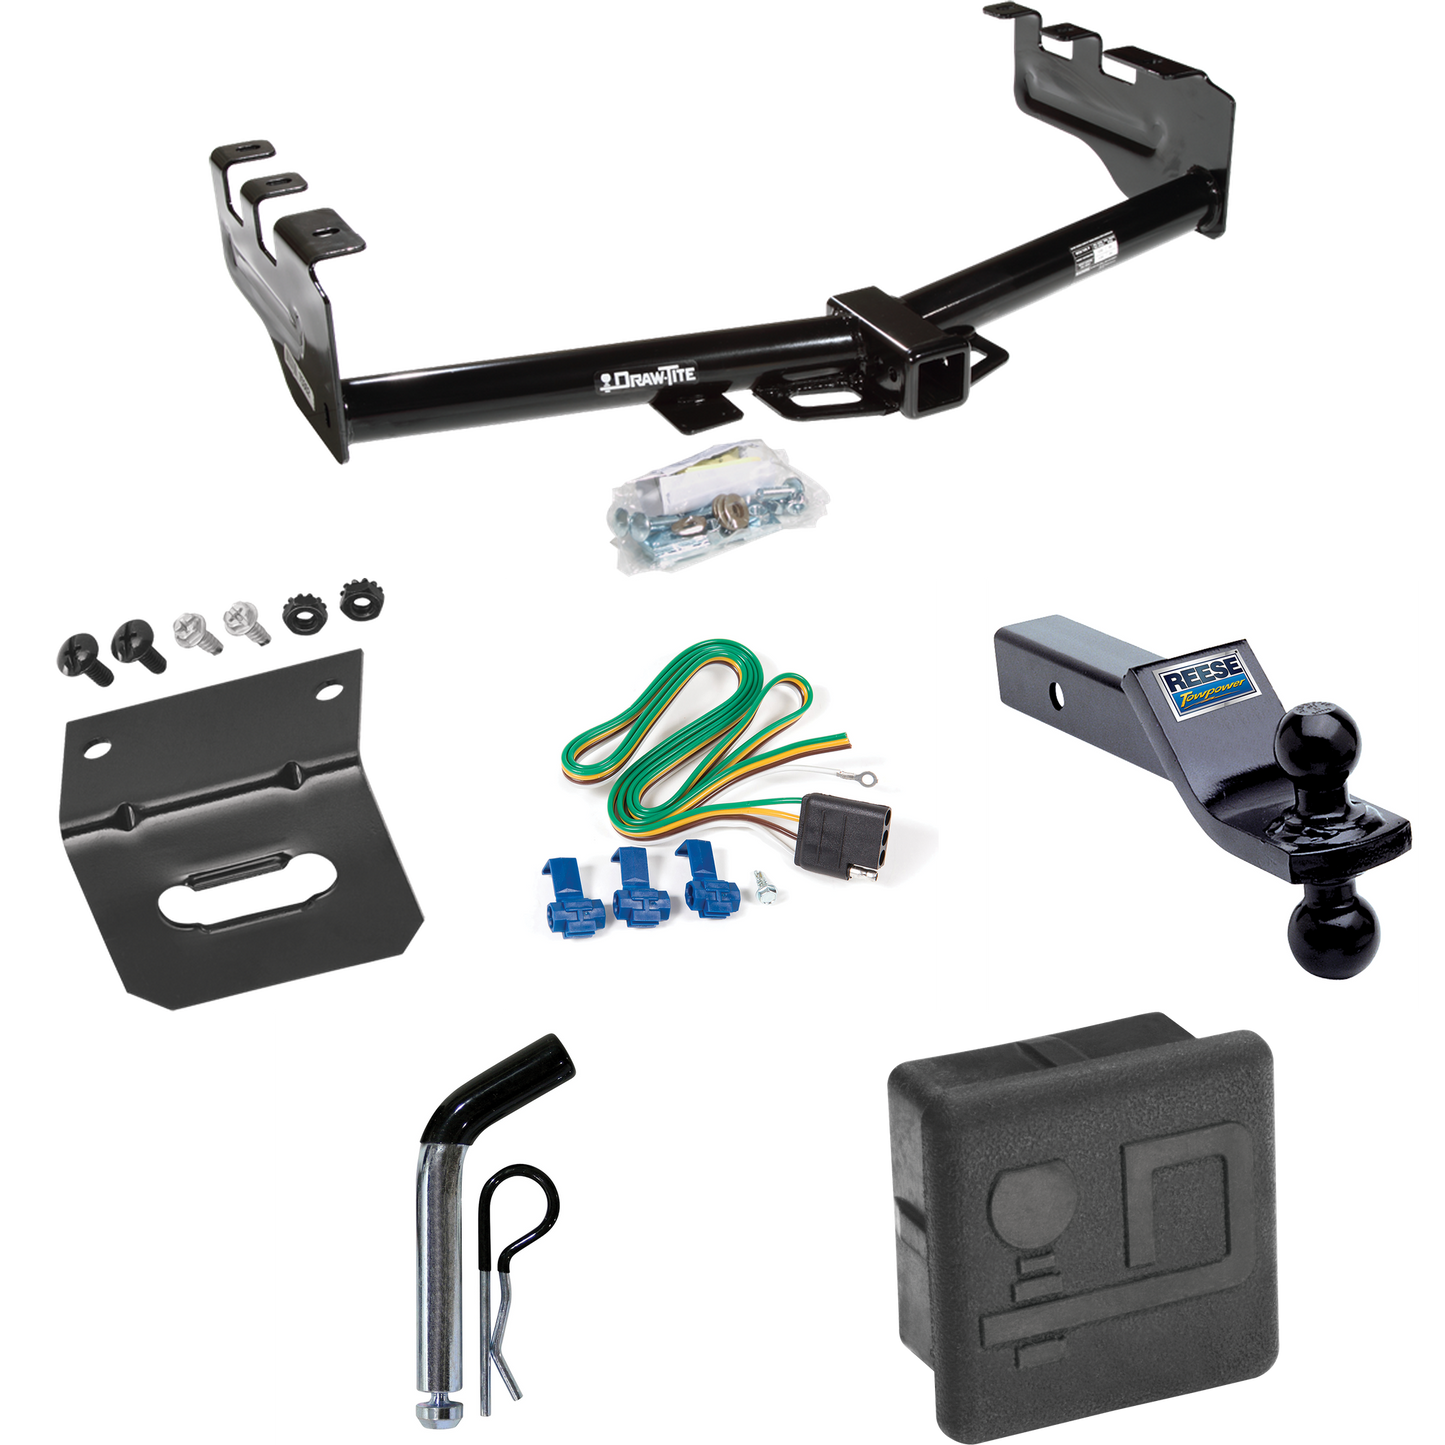 Fits 1999-2002 Chevrolet Silverado 1500 Trailer Hitch Tow PKG w/ 4-Flat Wiring + Dual Ball Ball Mount 1-7/8" & 2" Trailer Balls + Pin/Clip + Wiring Bracket + Hitch Cover By Draw-Tite